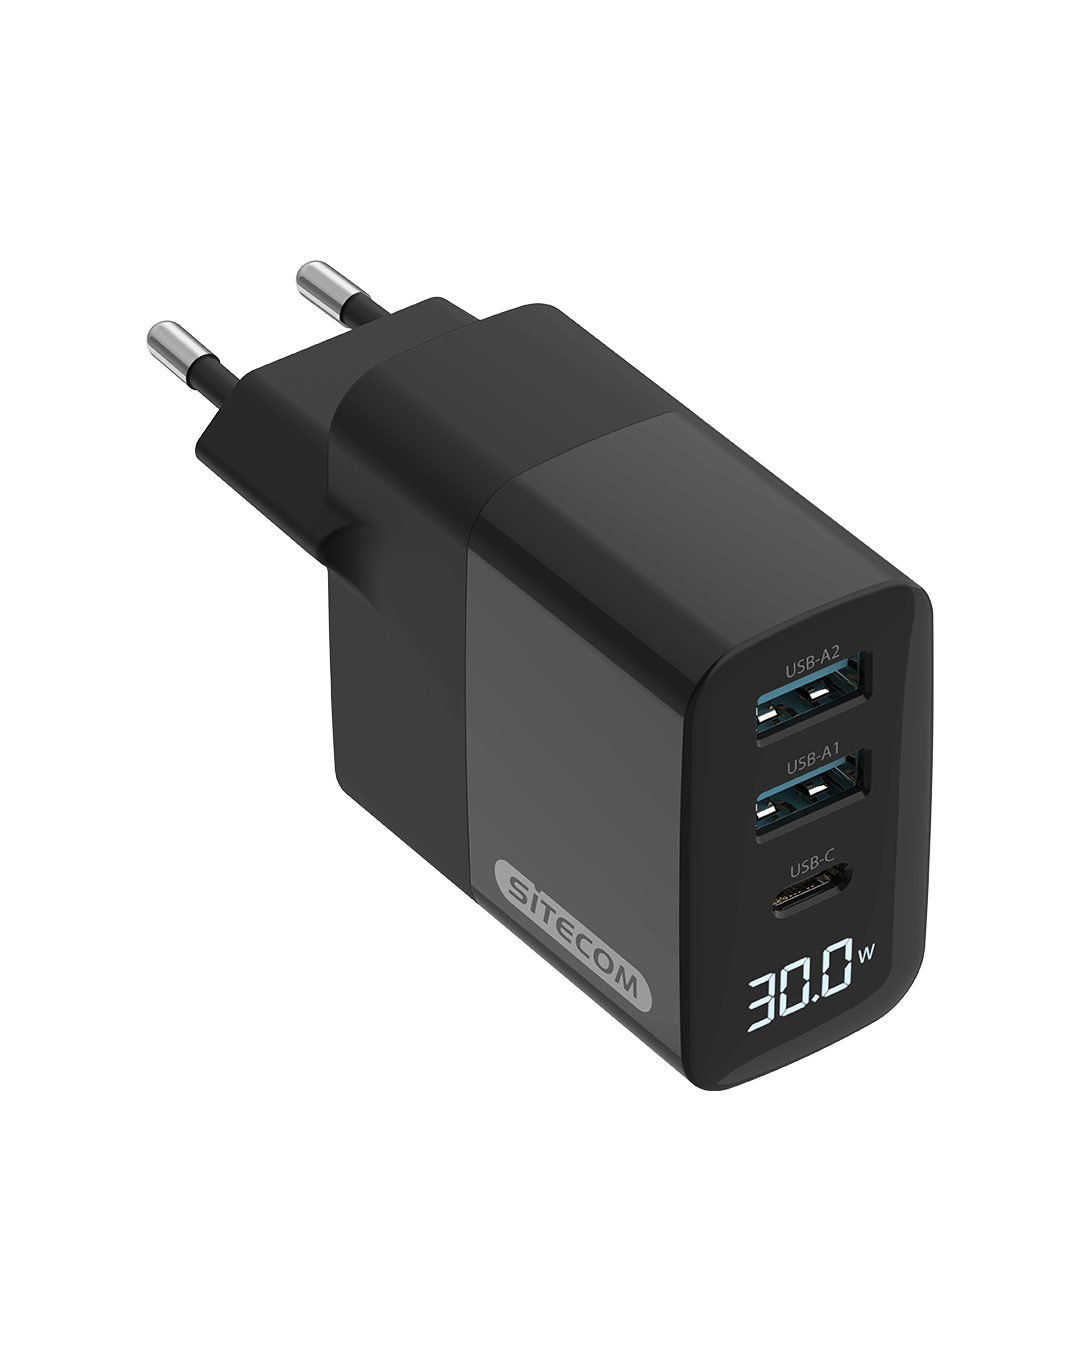 Sitecom - 30W GaN Power Delivery Wall Charger with LED display - CH-1001